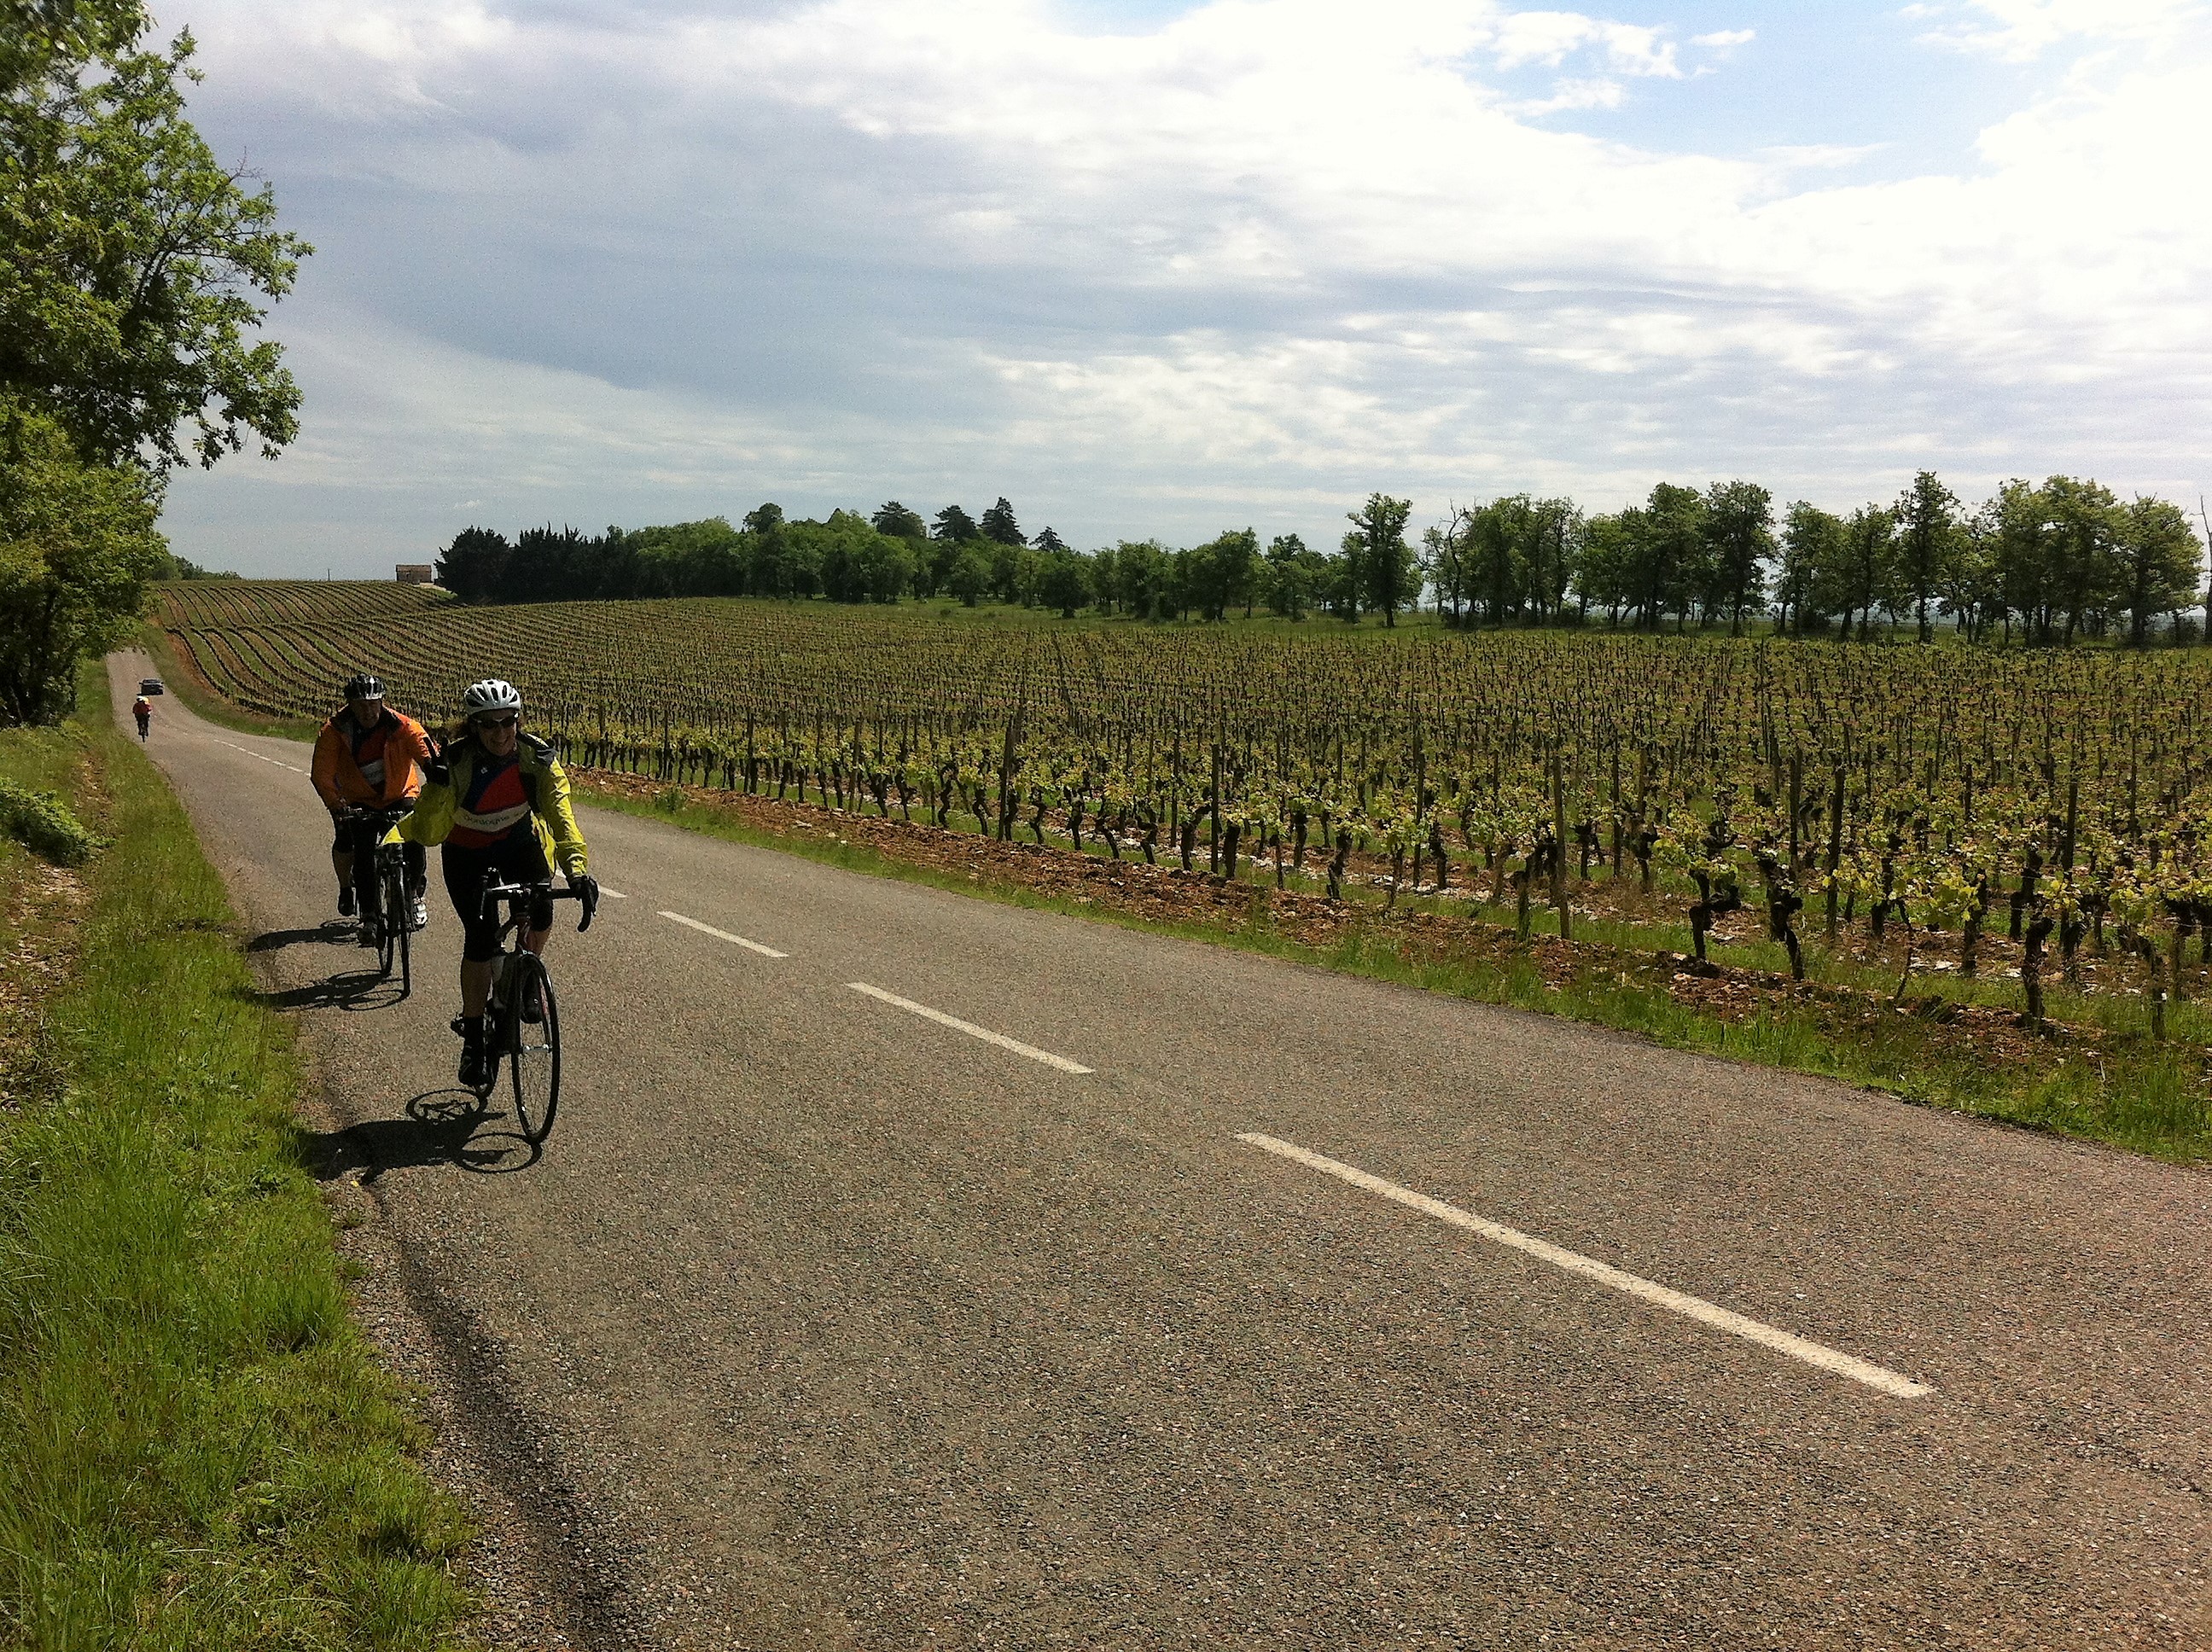 Our Dordogne bicycle tours are perfect for individuals, couples and small groups